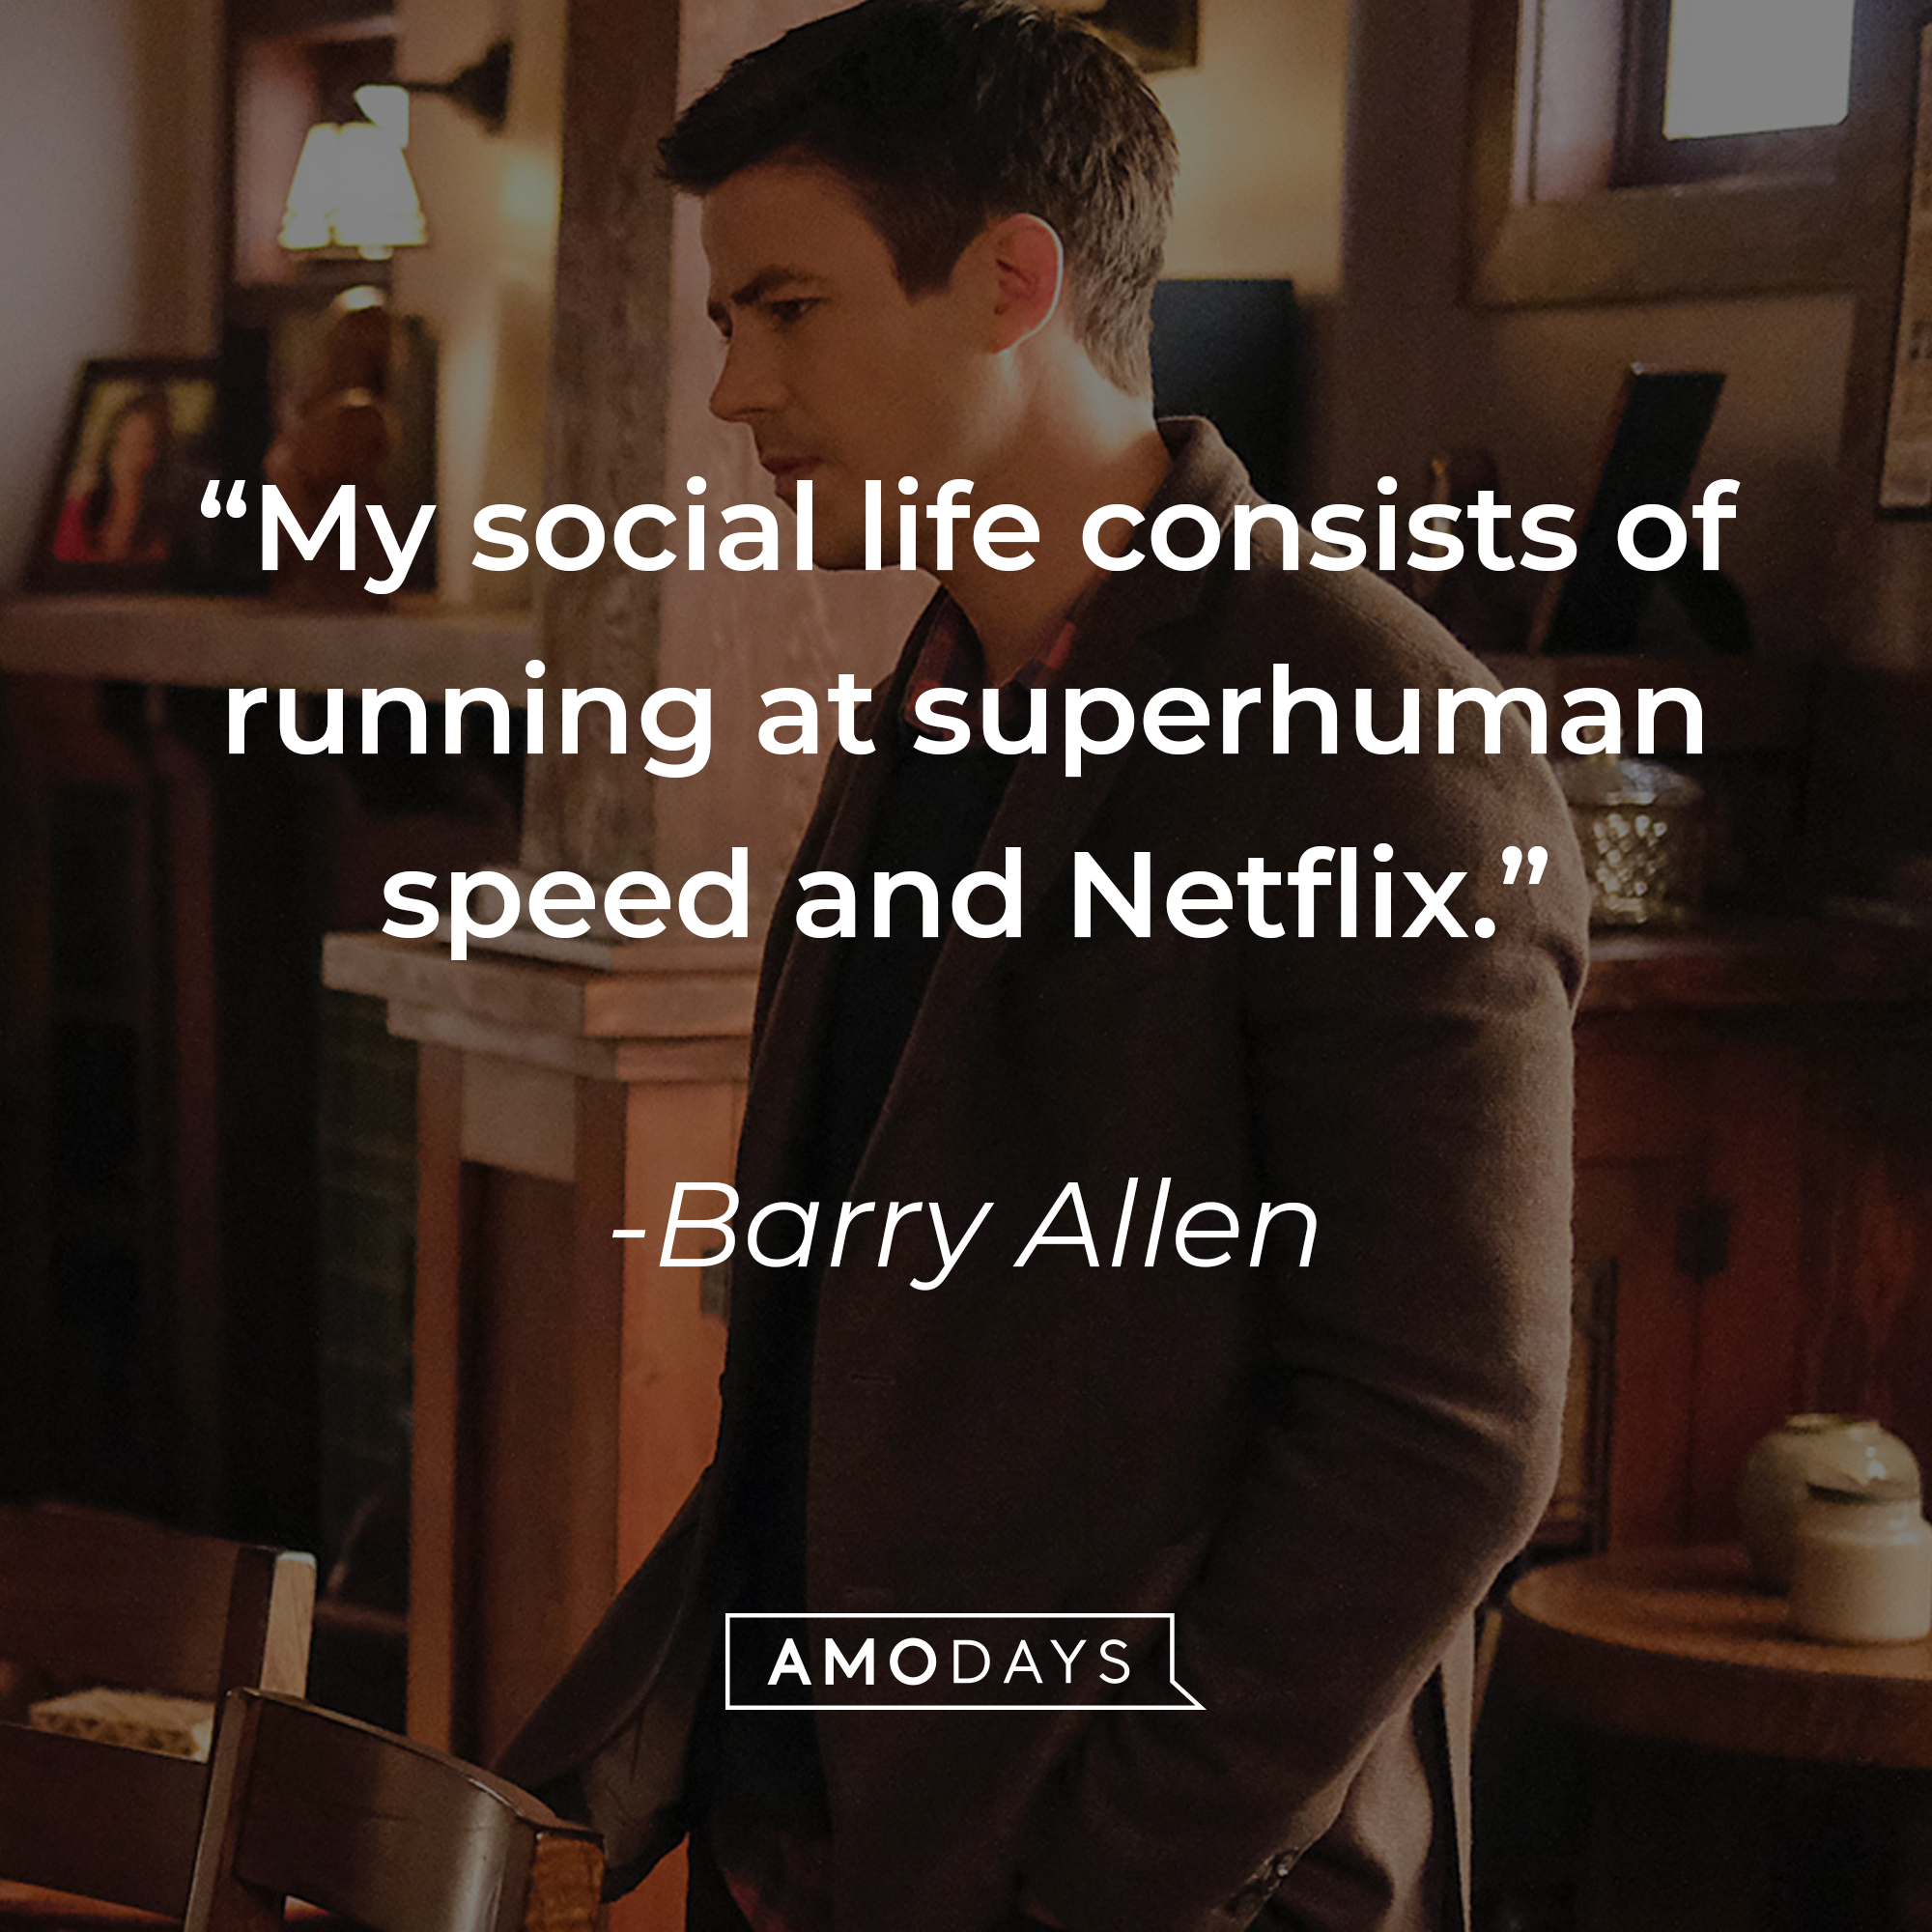 Barry Allen with his quote, "My social life consists of running at superhuman speed and Netflix." | Source: Facebook/CWTheFlash